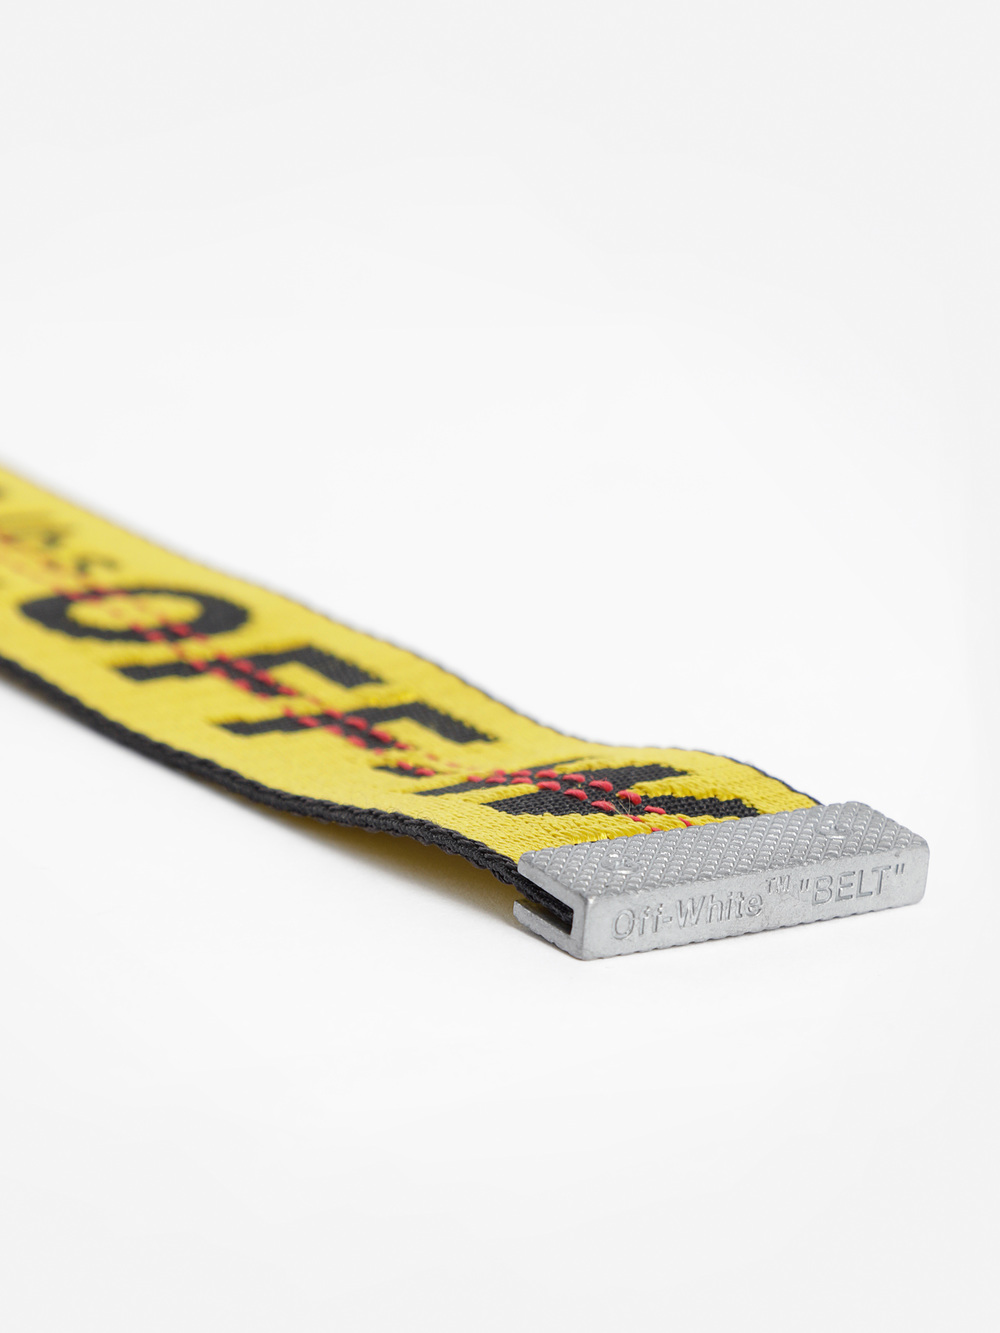 Get Your Hands on OFF-WHITE C/O VIRGIL ABLOH’s Latest Belts